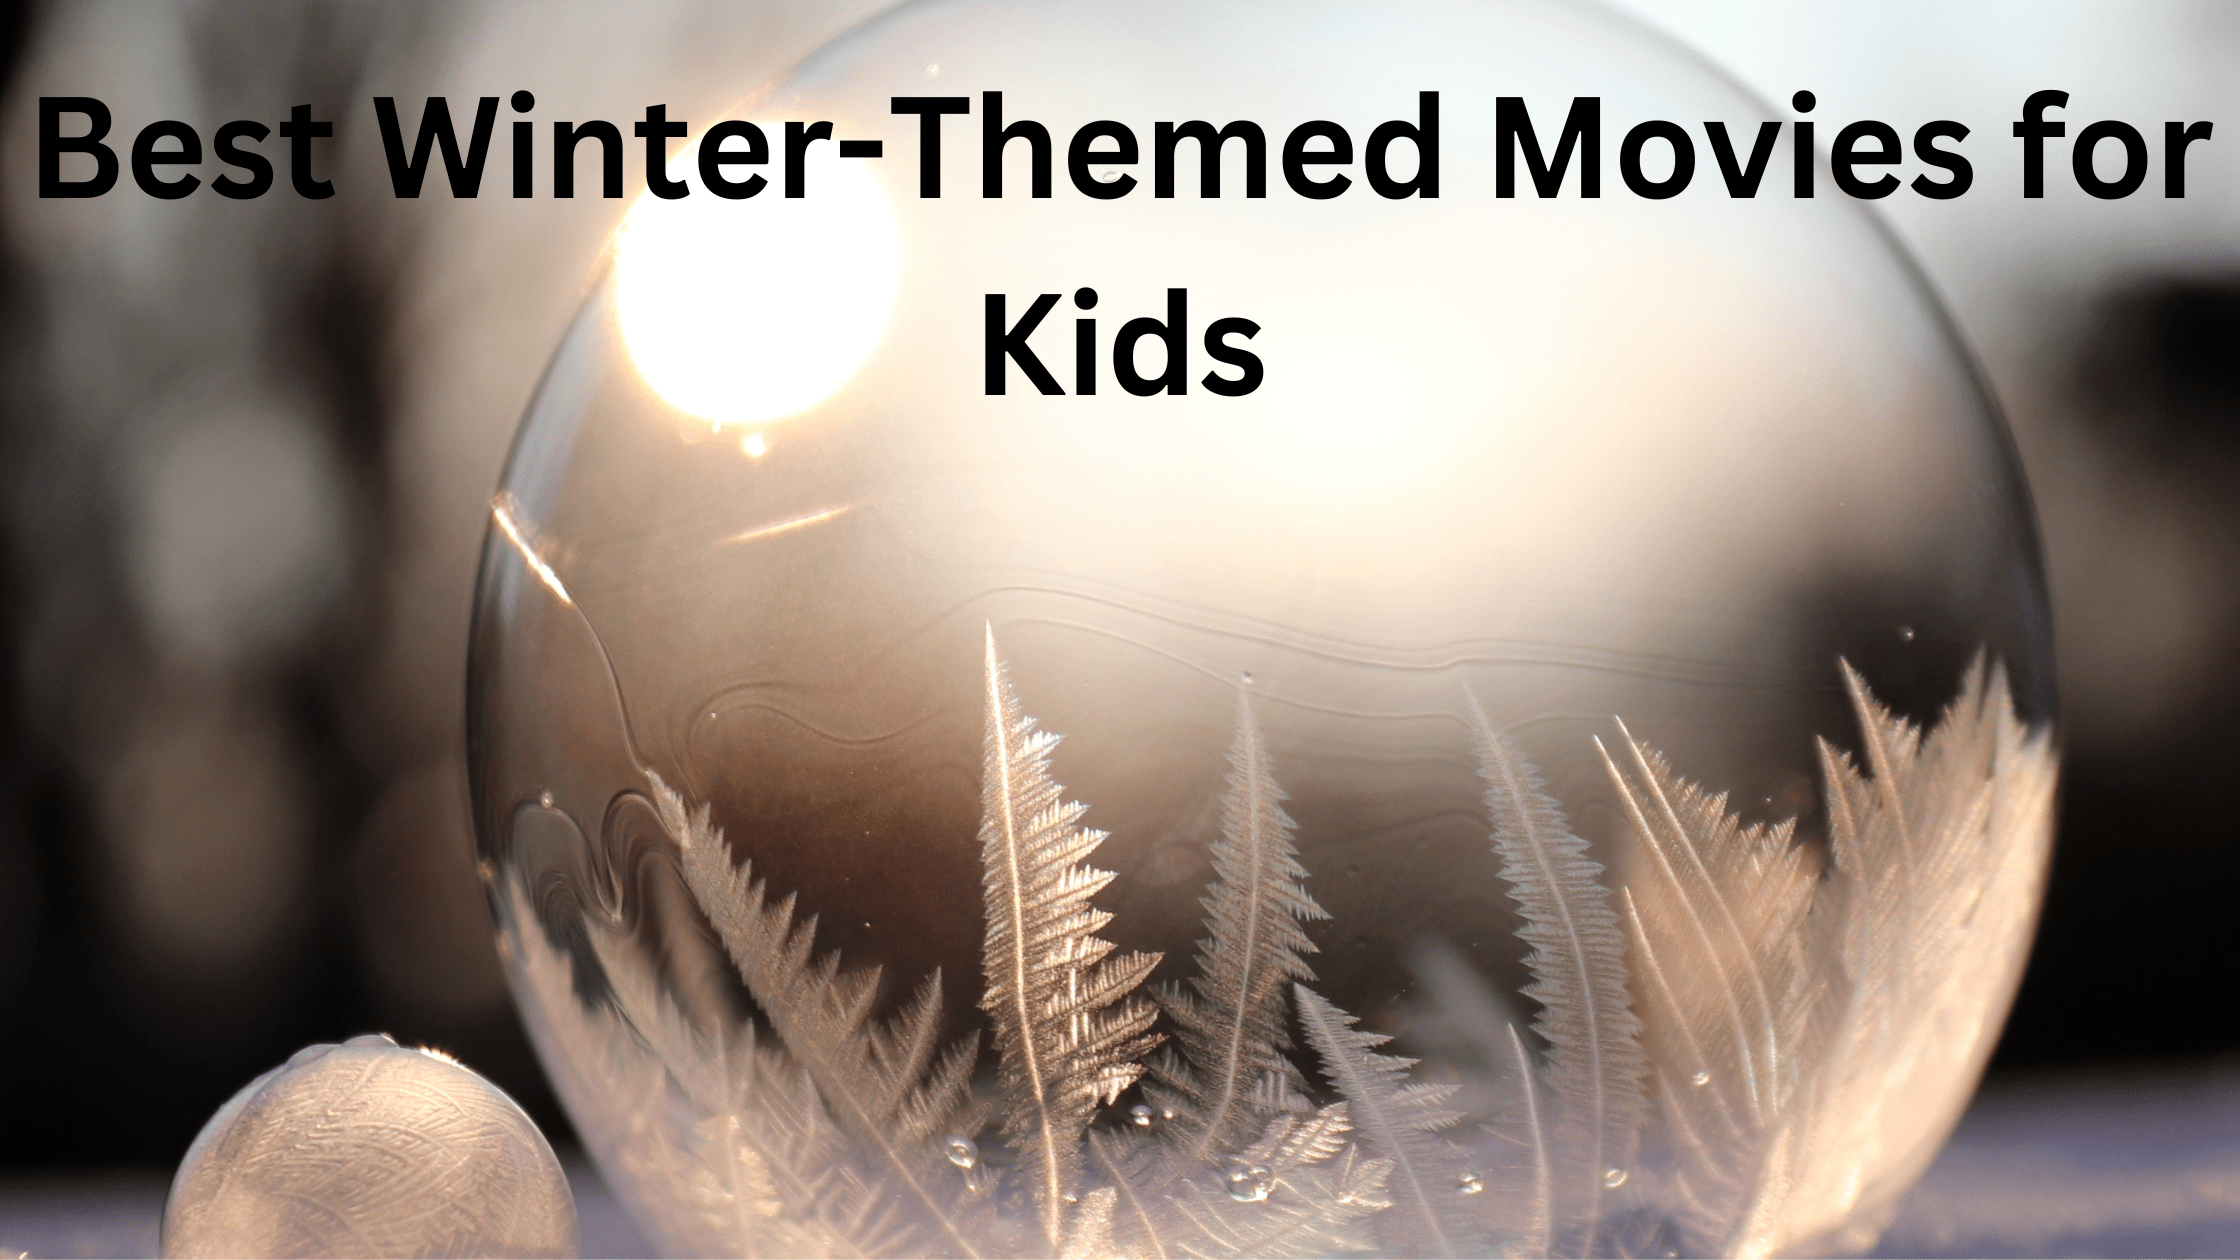 11 Best Winter-Themed Movies for Kids to Watch 4